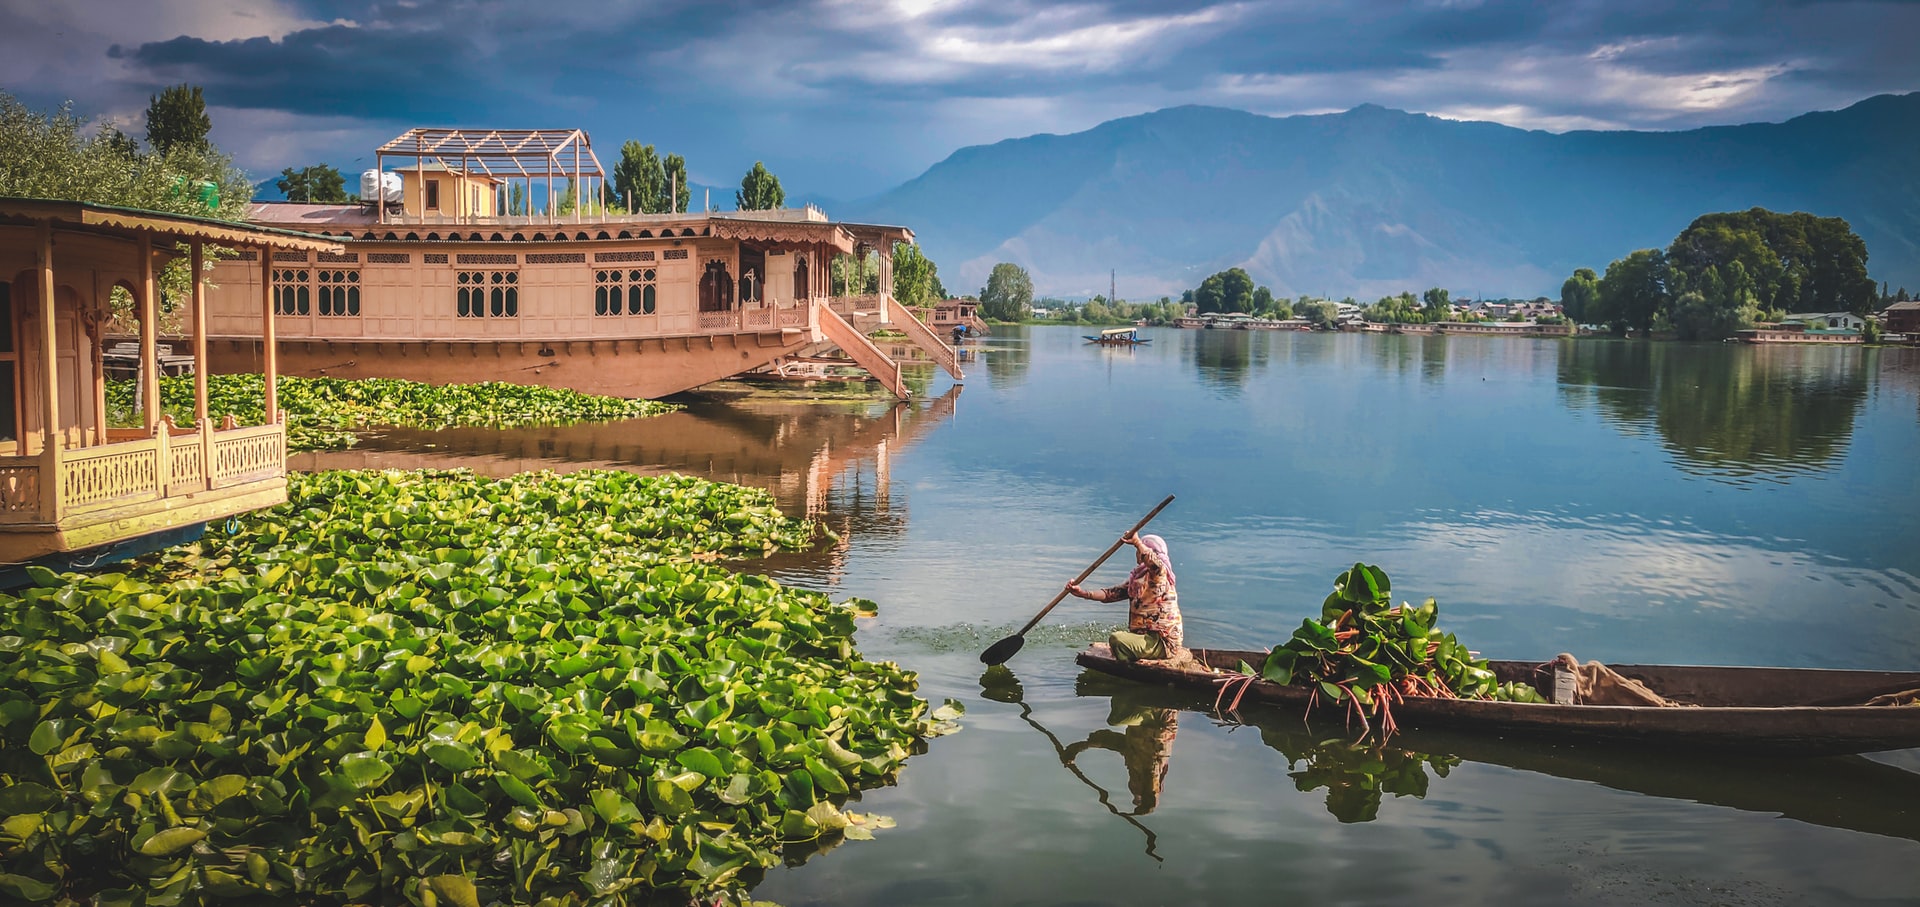 A woman rowing a boat known as "Shikara" in Srinagar, Kashmir, where the novel "Life in the Clock Tower Valley" is set.